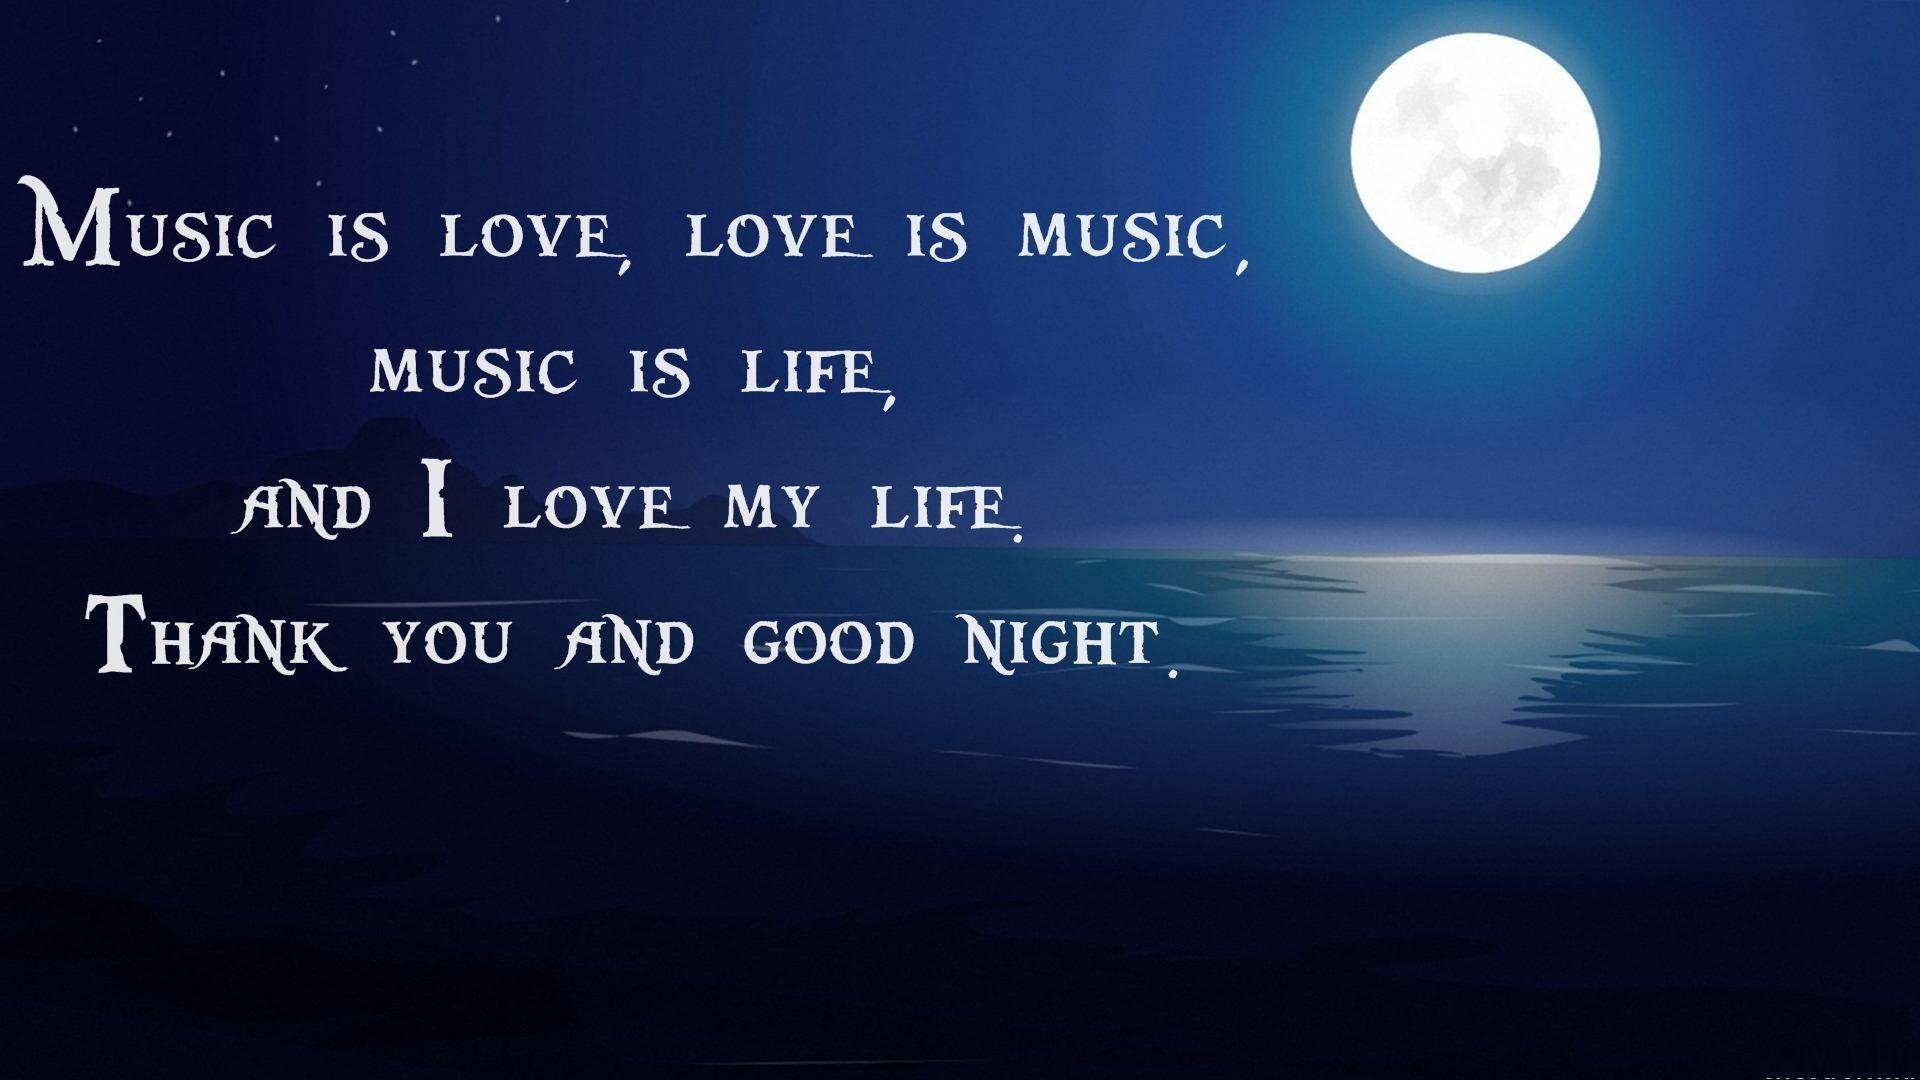 Good Night Wallpaper HD with quotes and wishes. Good night